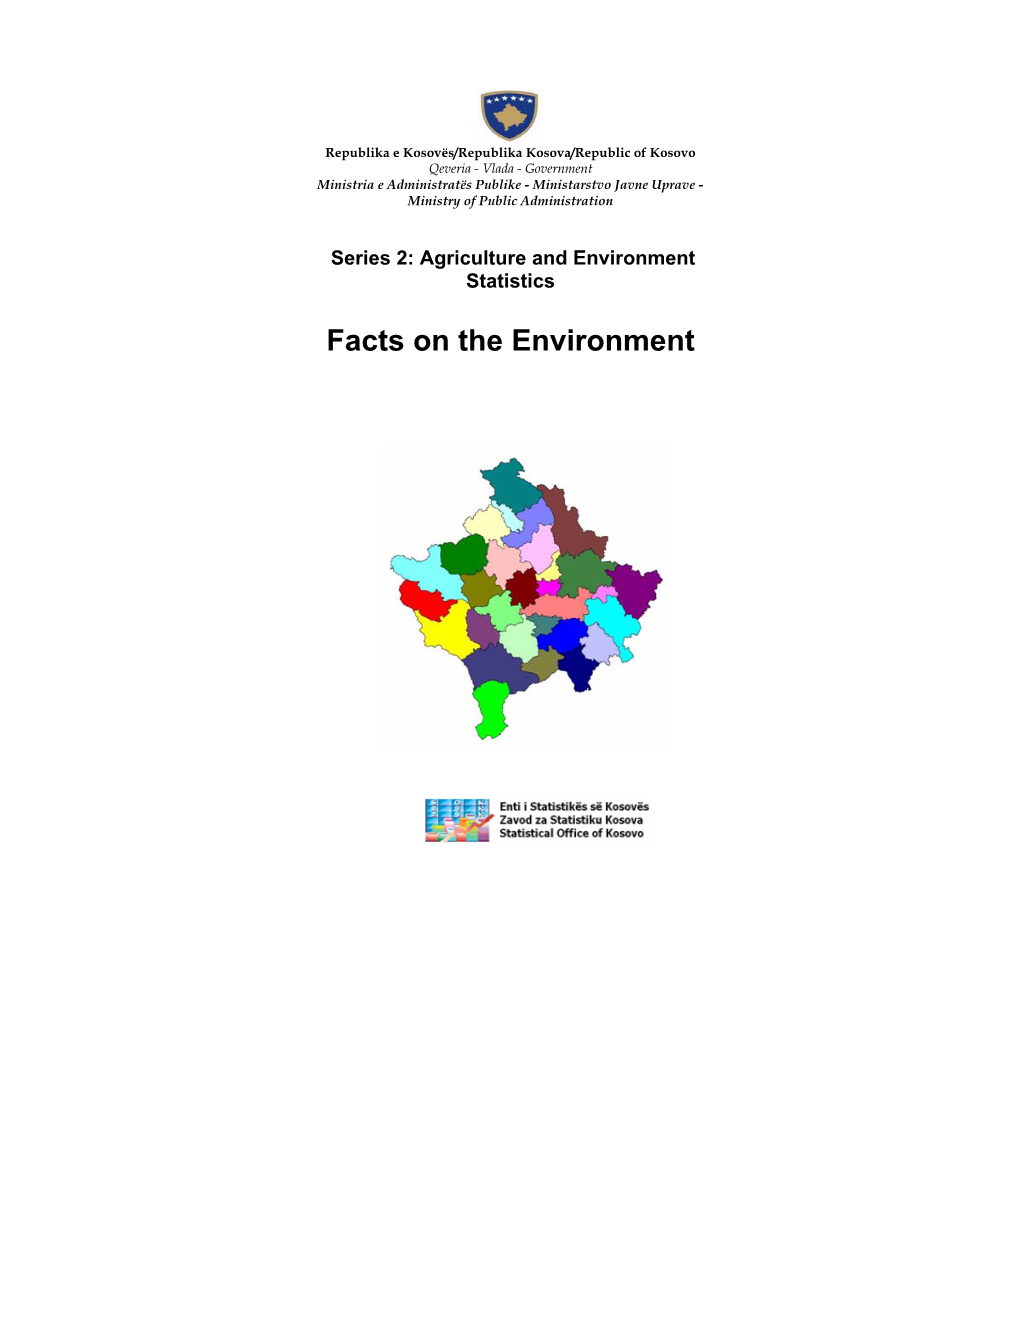 Some Facts on the Environment, 2009 23/09/2009